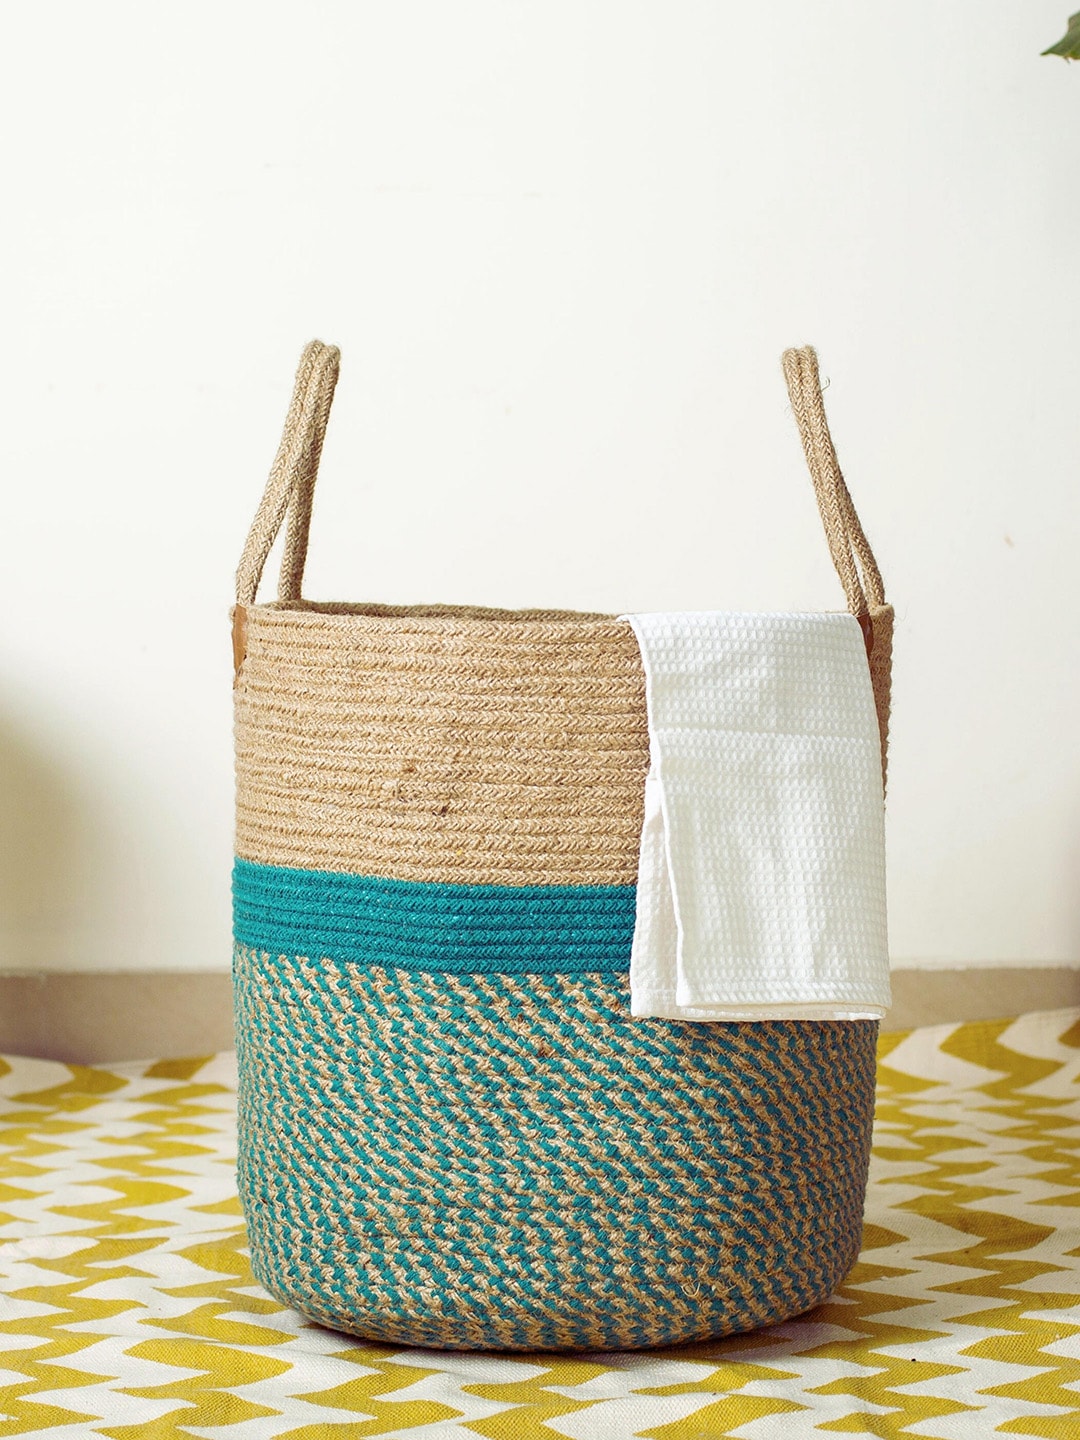 JASMEY HOMES Teal & Beige Textured Jute Laundry Bag Price in India